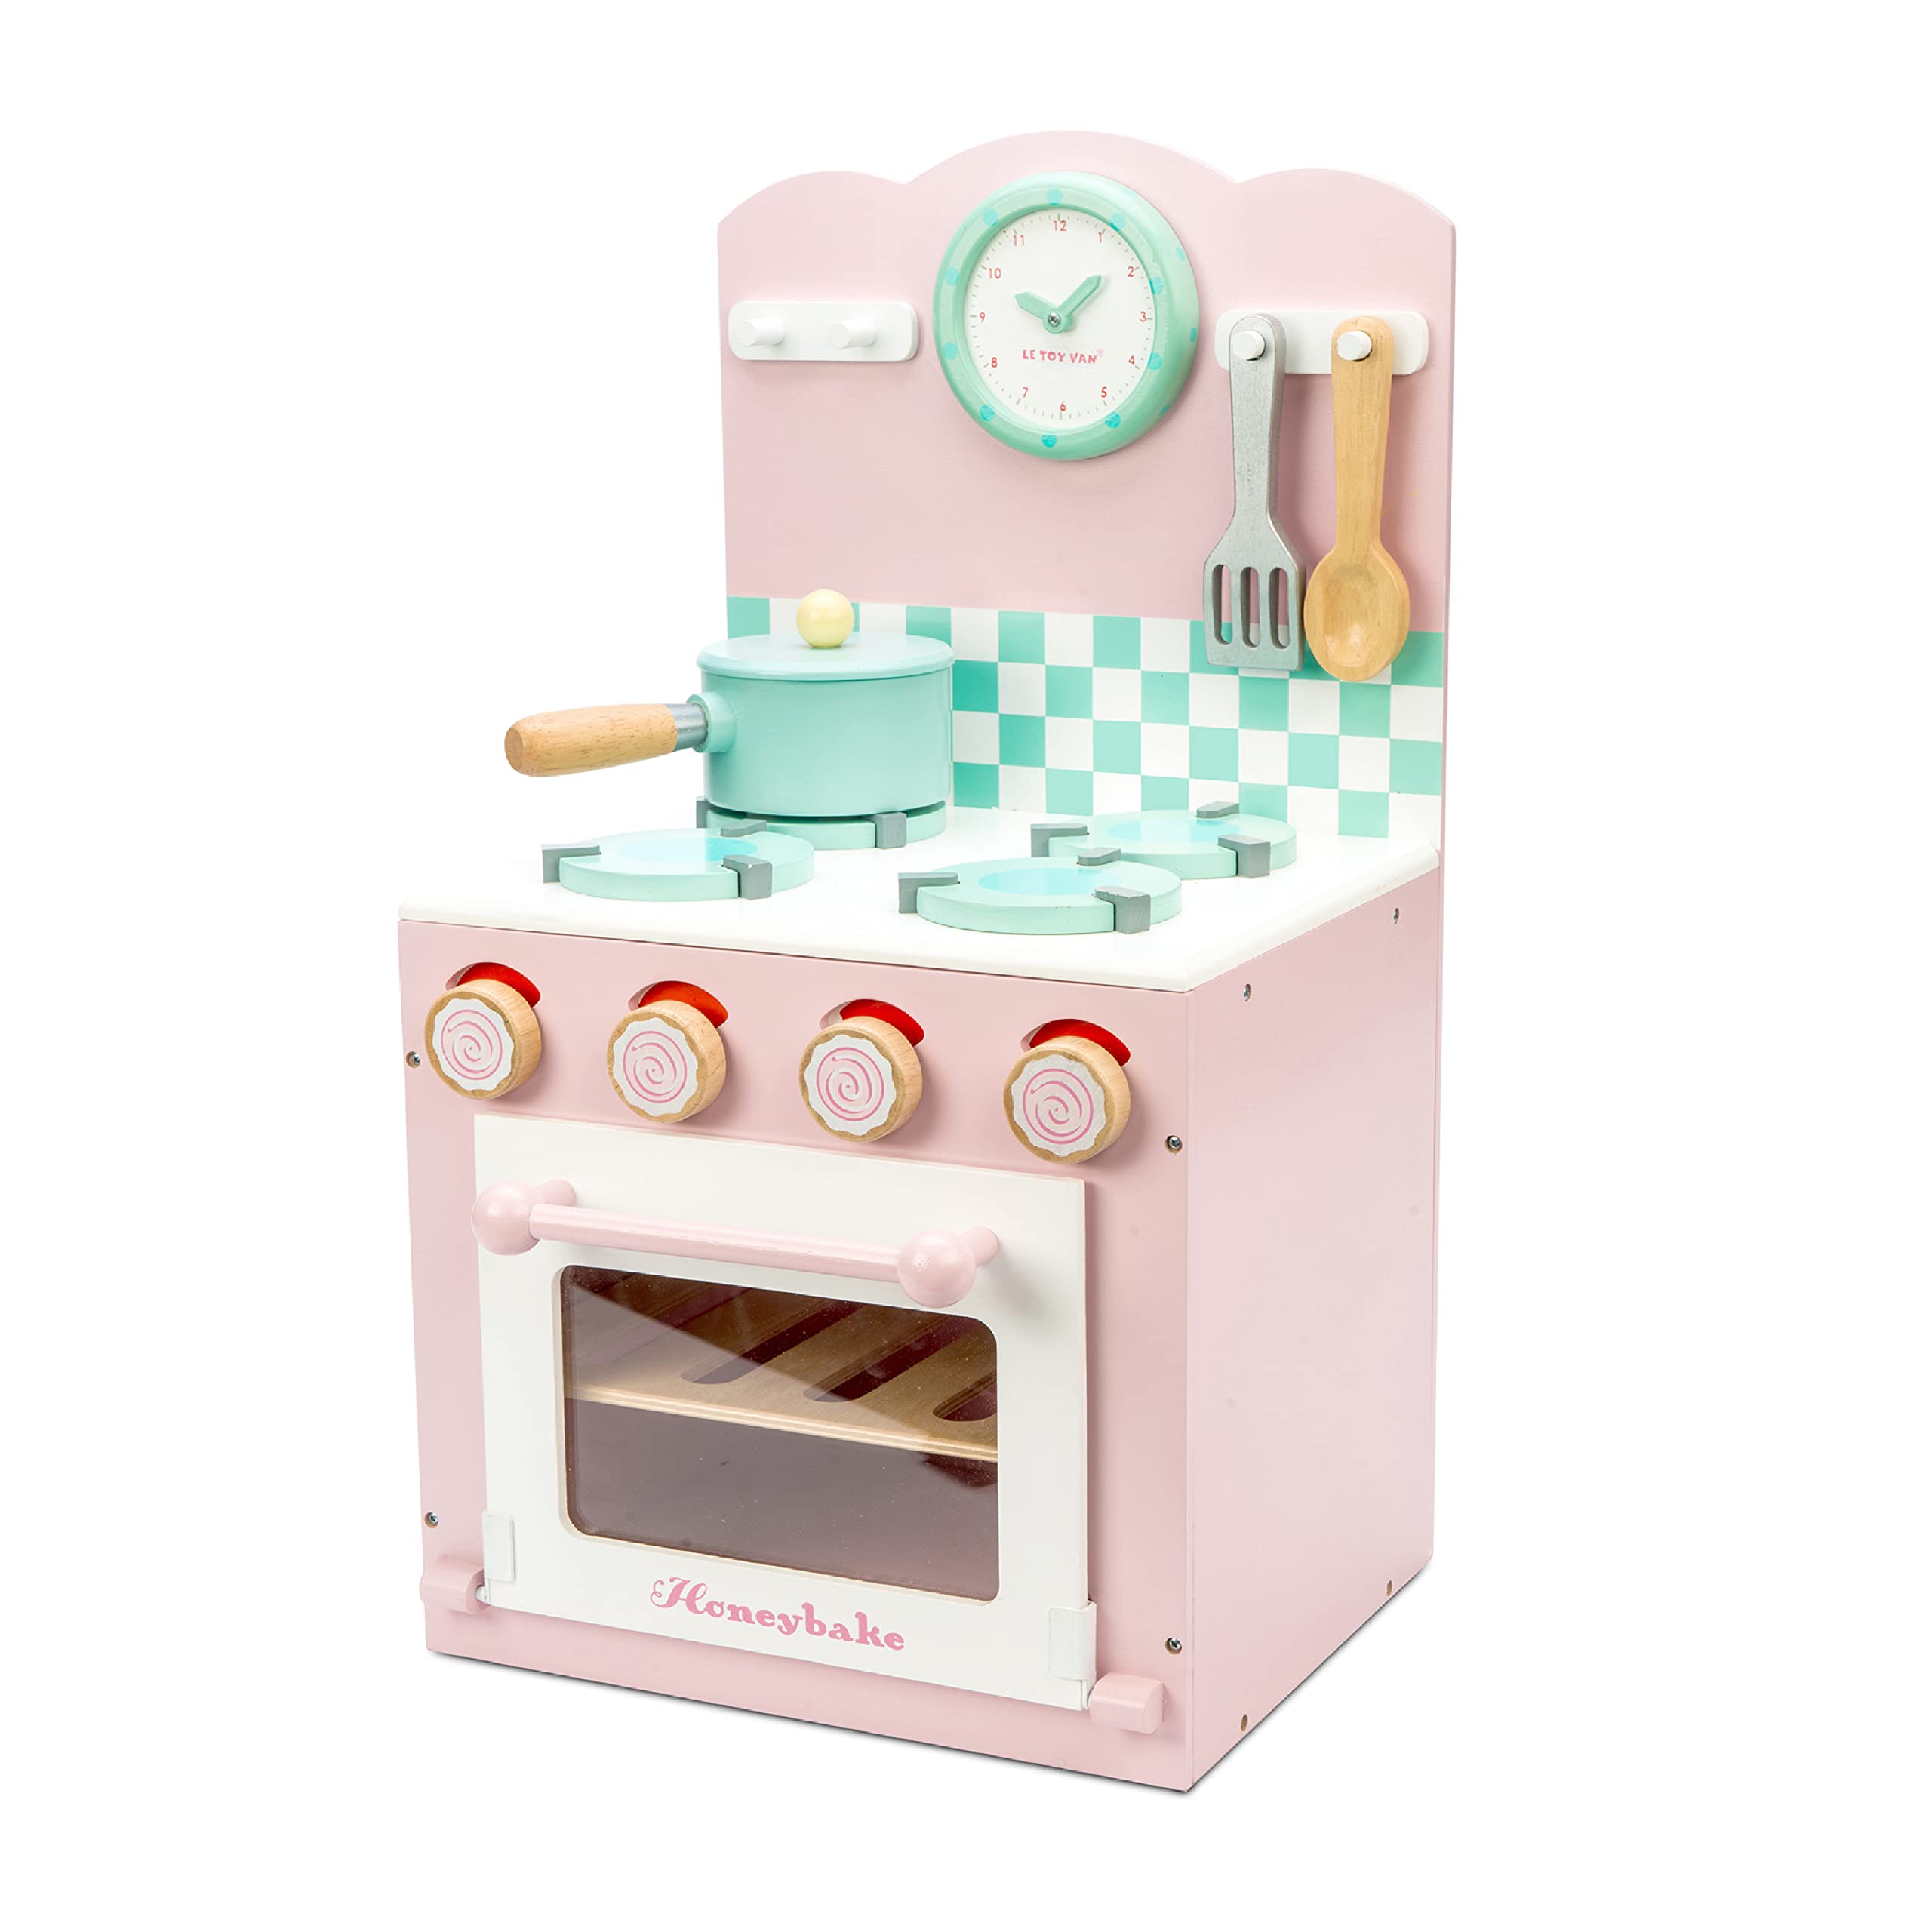 Le Toy Van - Colorful Wooden Honeybake Oven & Hob Pink Set | Wood Pretend Play Kitchen Toy Set | Girls and Boys Role Play Toy Kitchen Accessories